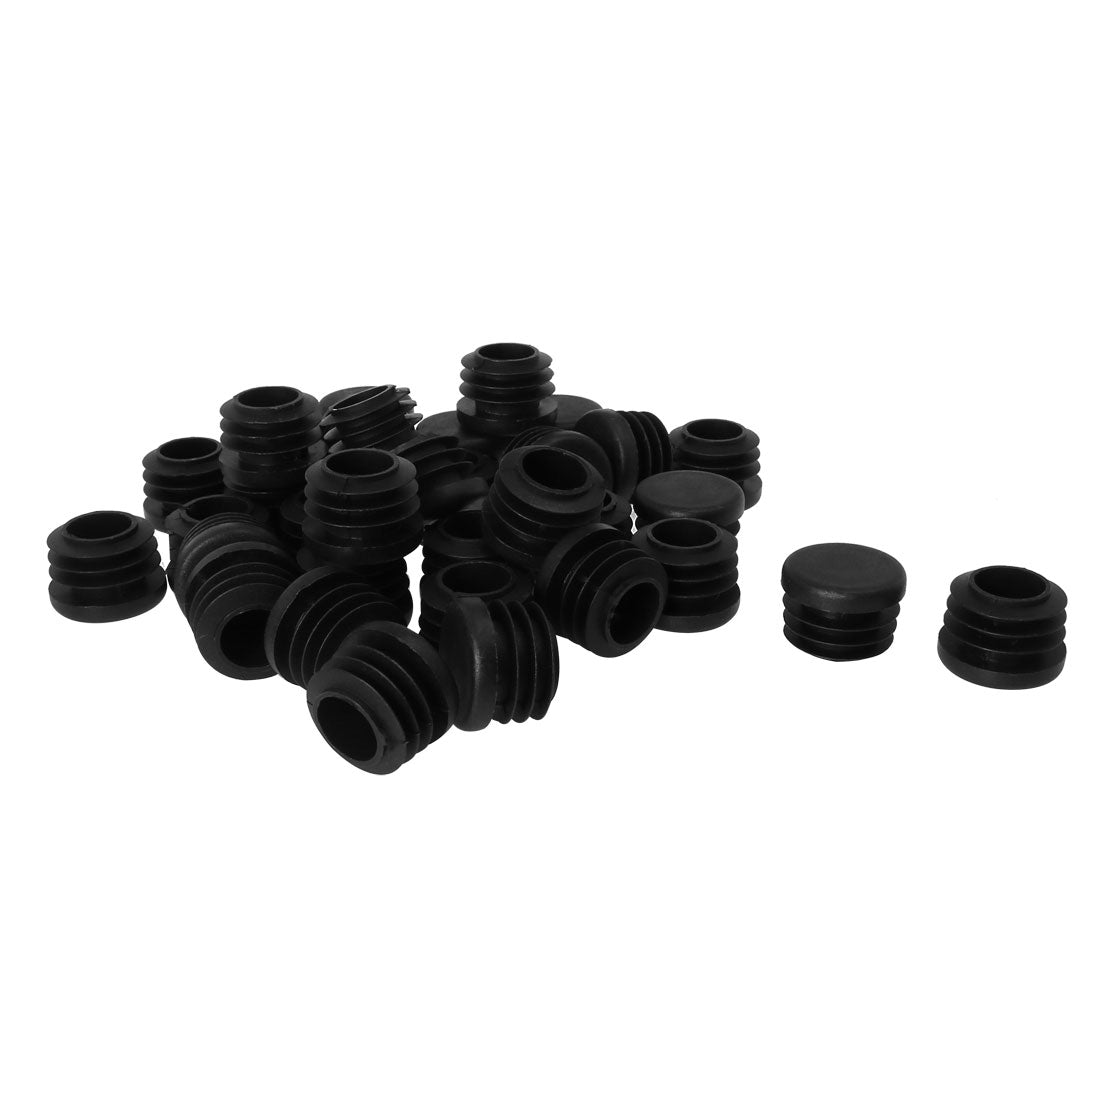 Uxcell Uxcell 7/8" 0.87" OD Plastic Round Tube Insert Glide End Cap Pad 34pcs 0.75"-0.83" Inner Dia for Furniture Porch Floor Prevent Noise